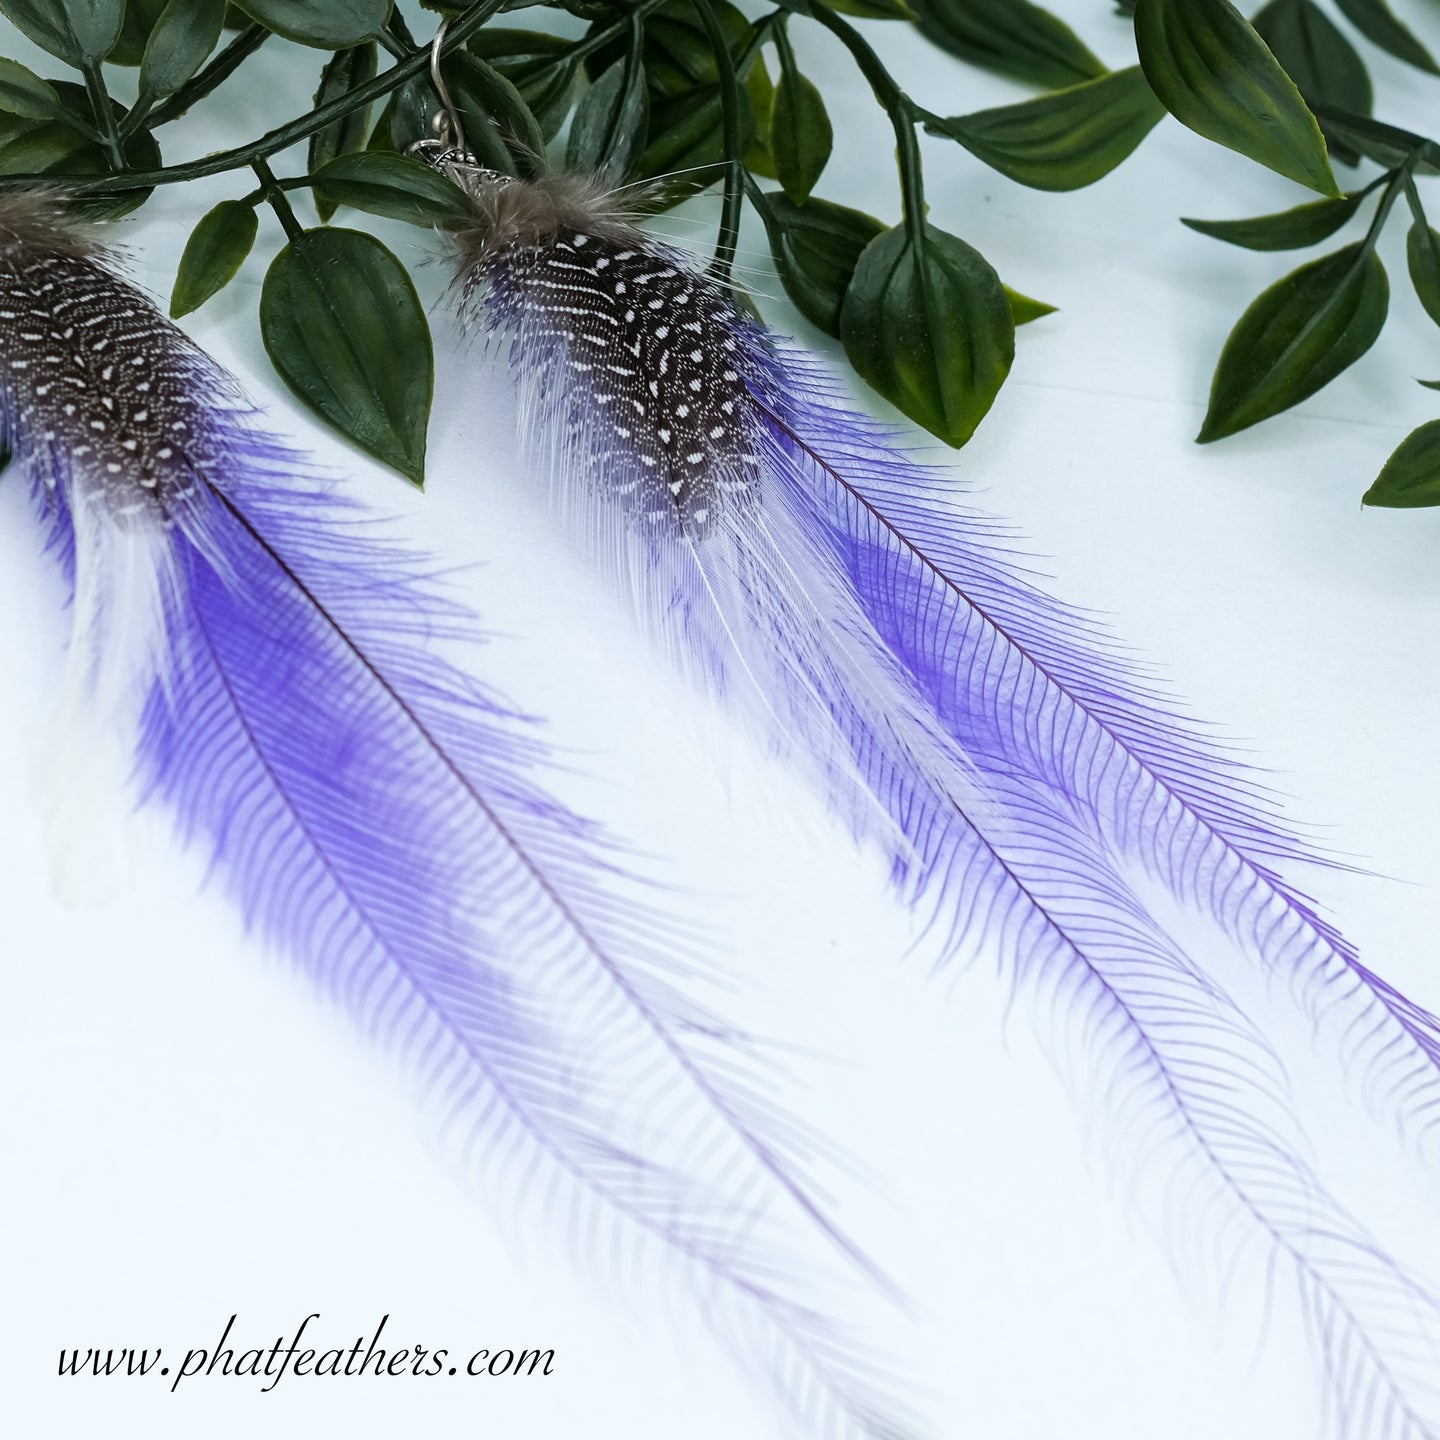 Statement Emu, Guinea Fowl and Rooster Feather Earrings